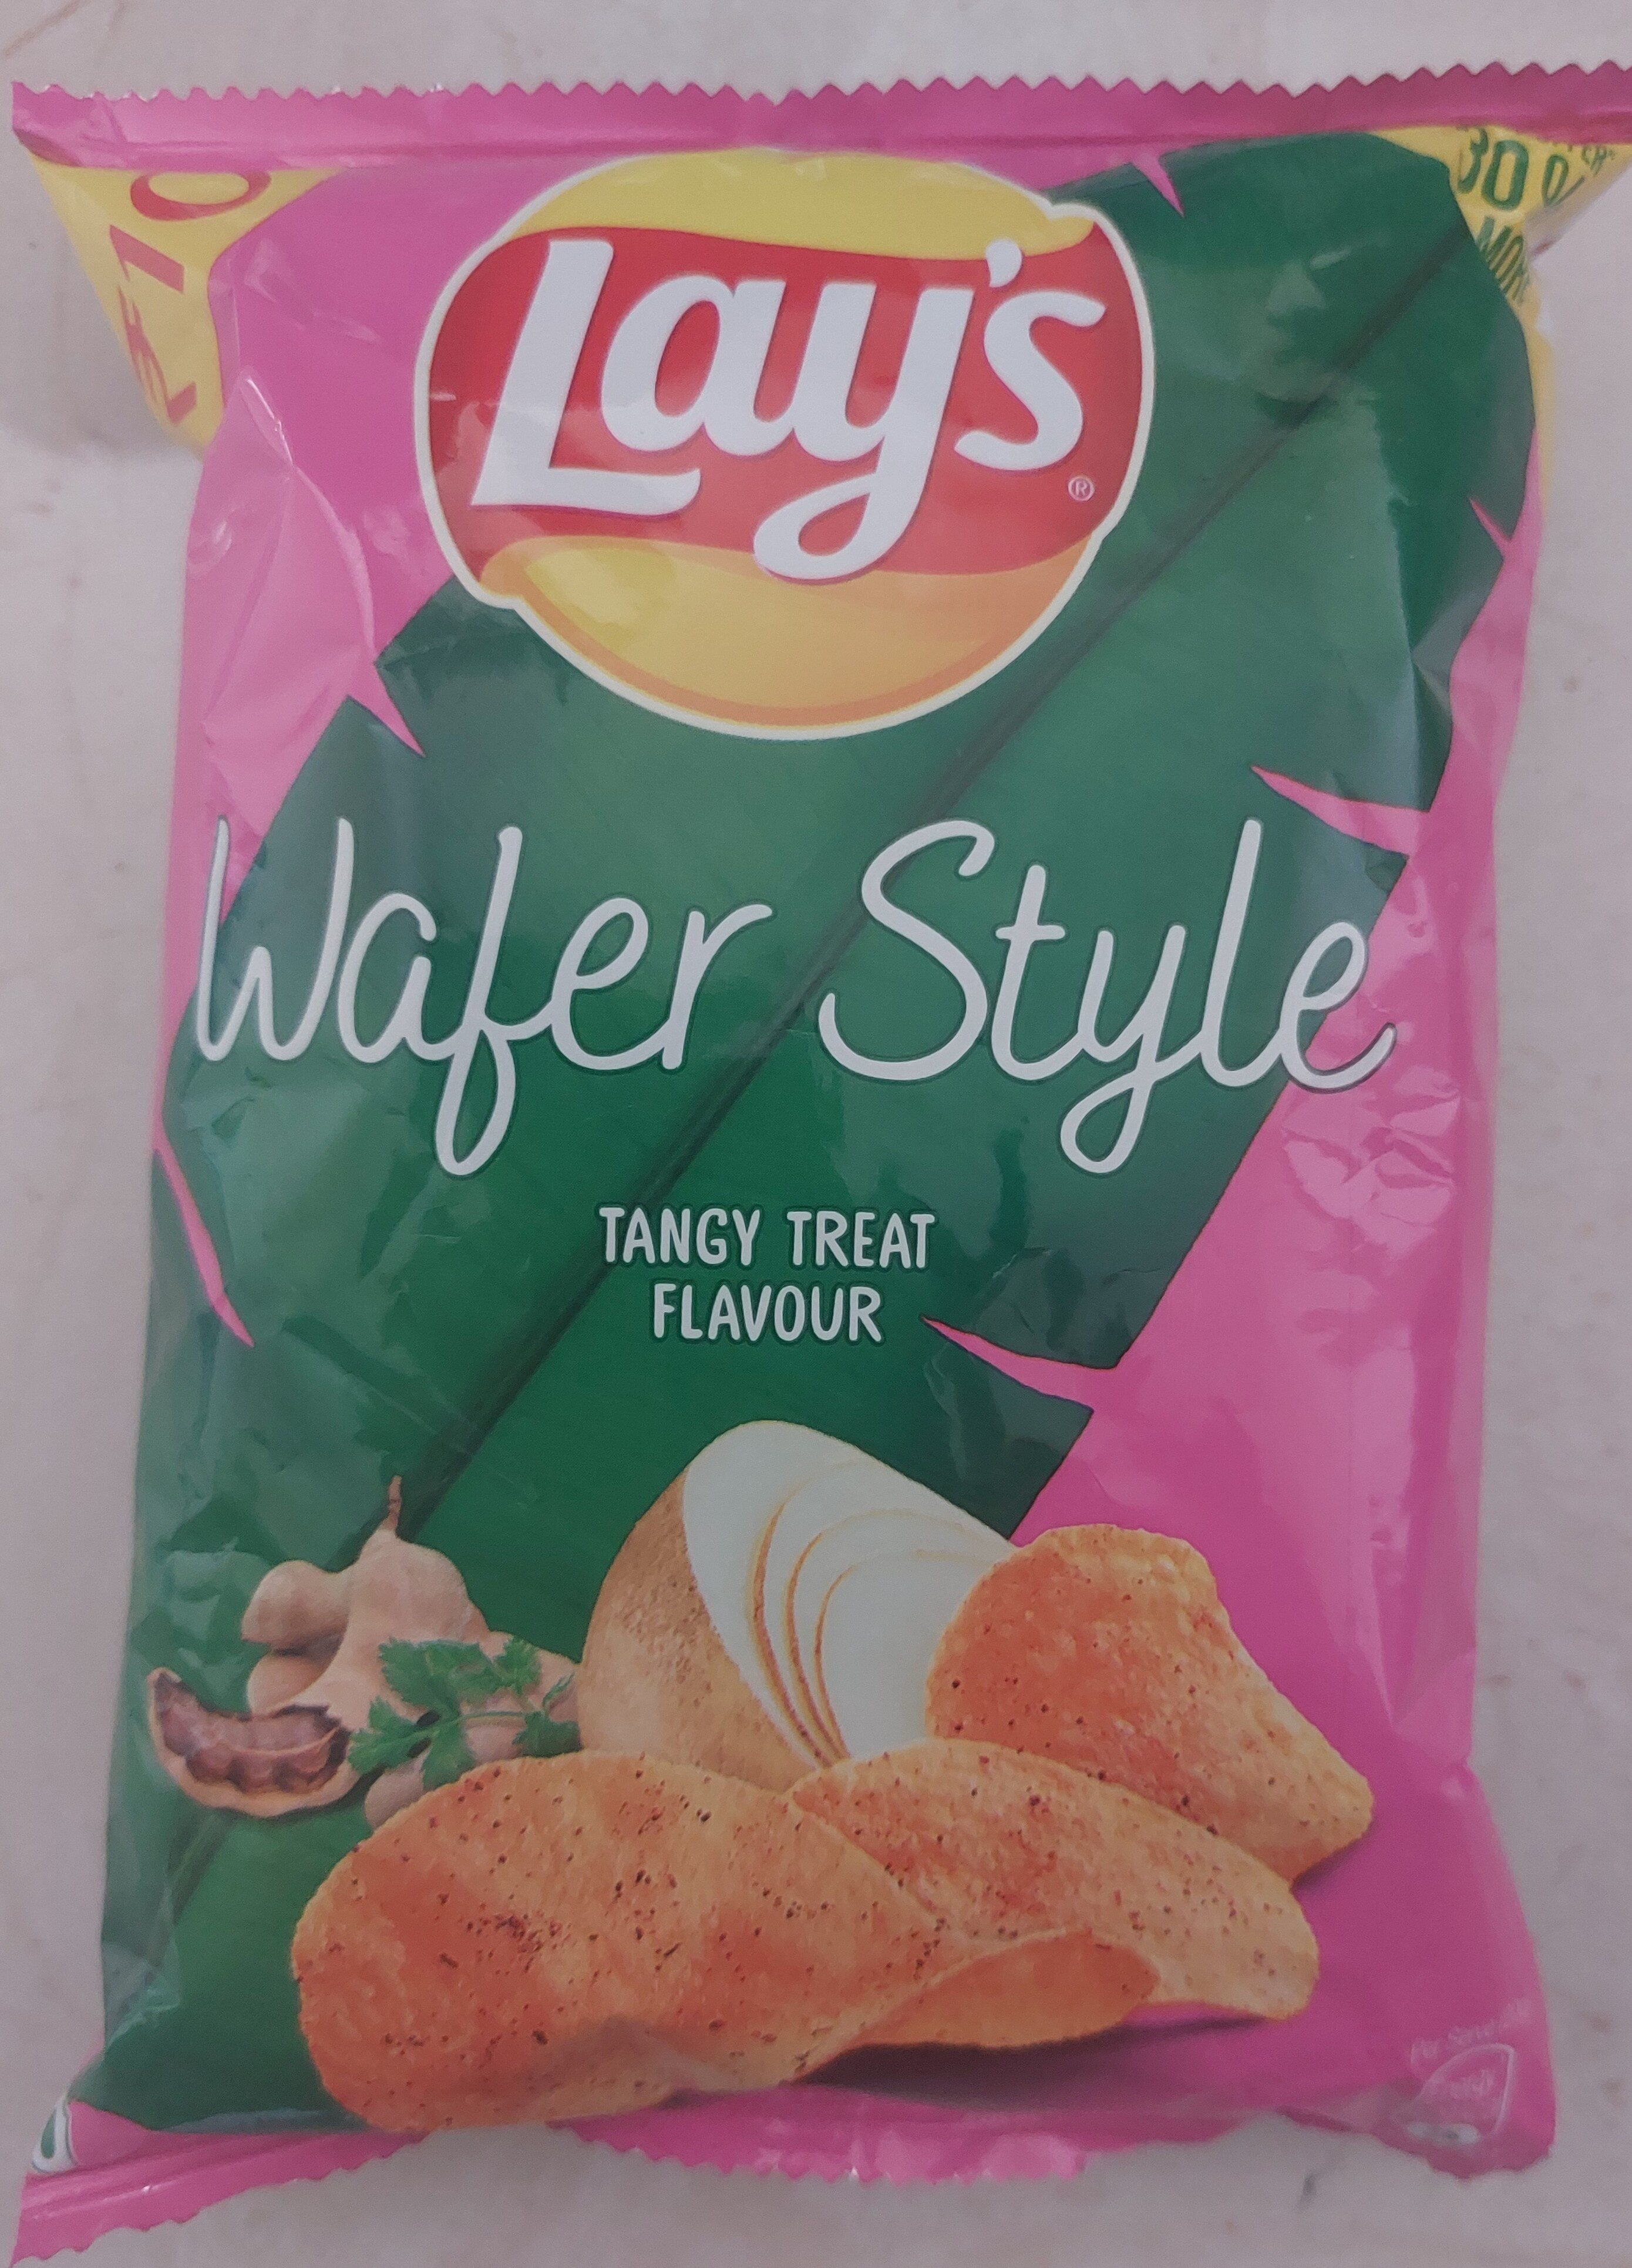 Wafer Style Tangy Treat Flavour - Product